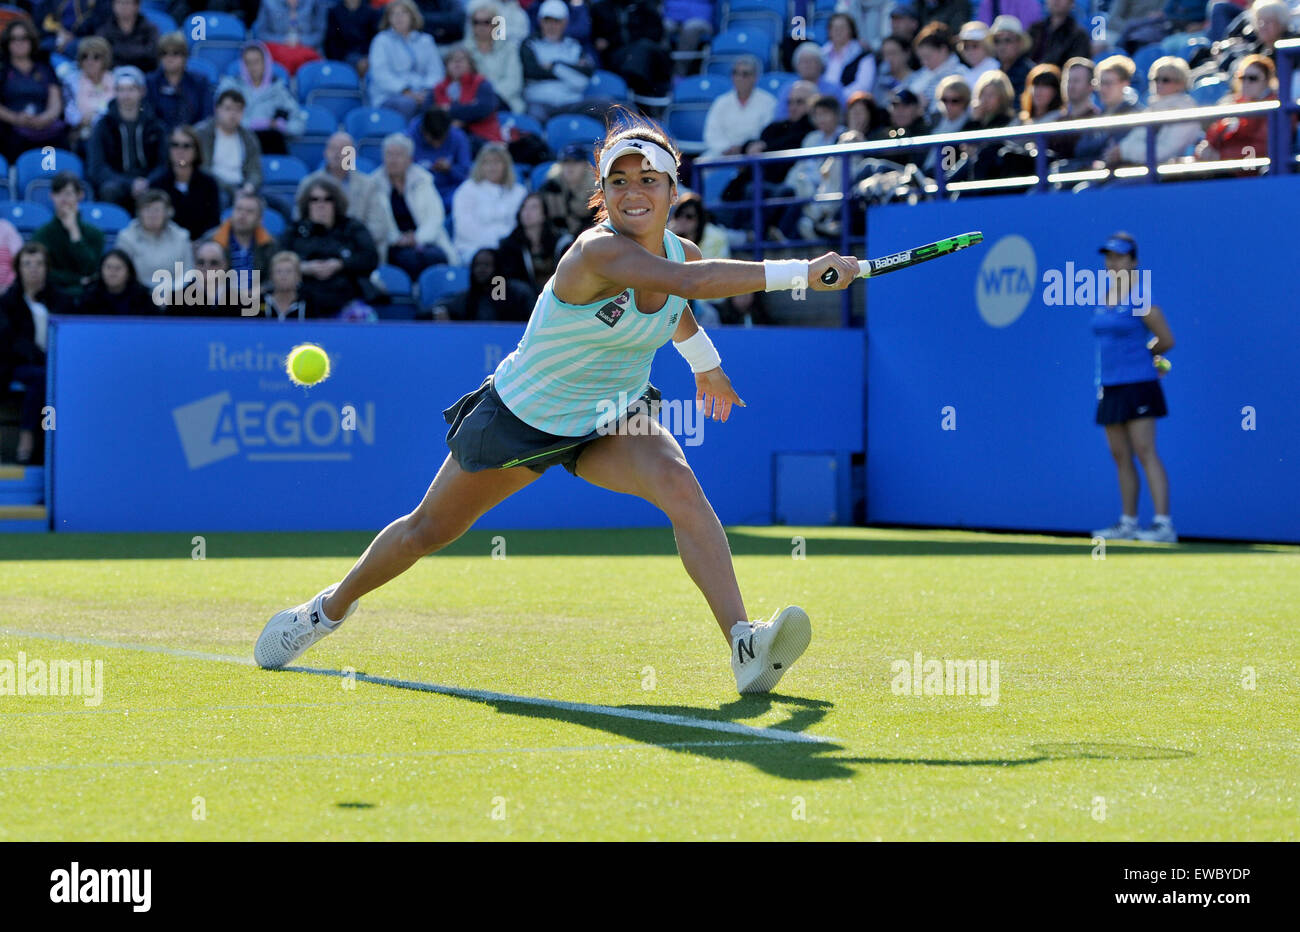 Eastbourne, Sussex, UK. 22nd June, 2015. Heather Watson of Great Britain stretches for a backhand shot against Varvara Lepchenko of the USA in their tennis match at the Aegon International tennis tournament held in Devonshire Park Eastbourne   Credit:  Simon Dack/Alamy Live News Stock Photo